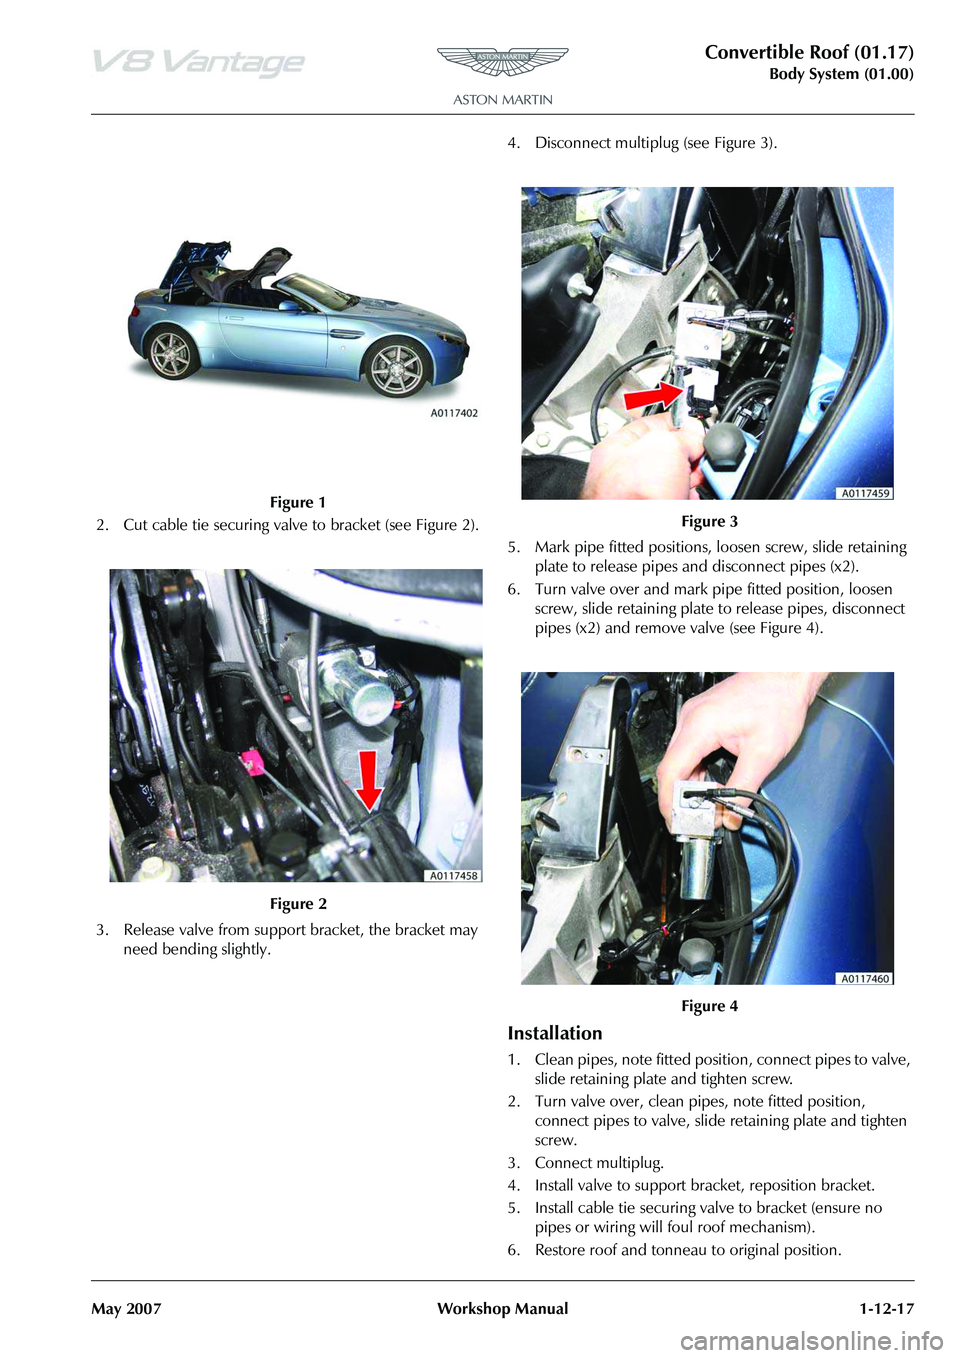 ASTON MARTIN V8 VANTAGE 2010  Workshop Manual Convertible Roof (01.17)
Body System (01.00)
May 2007 Workshop Manual 1-12-17
2. Cut cable tie securing valve  to bracket (see Figure 2).
3. Release valve from support bracket, the bracket may  need b